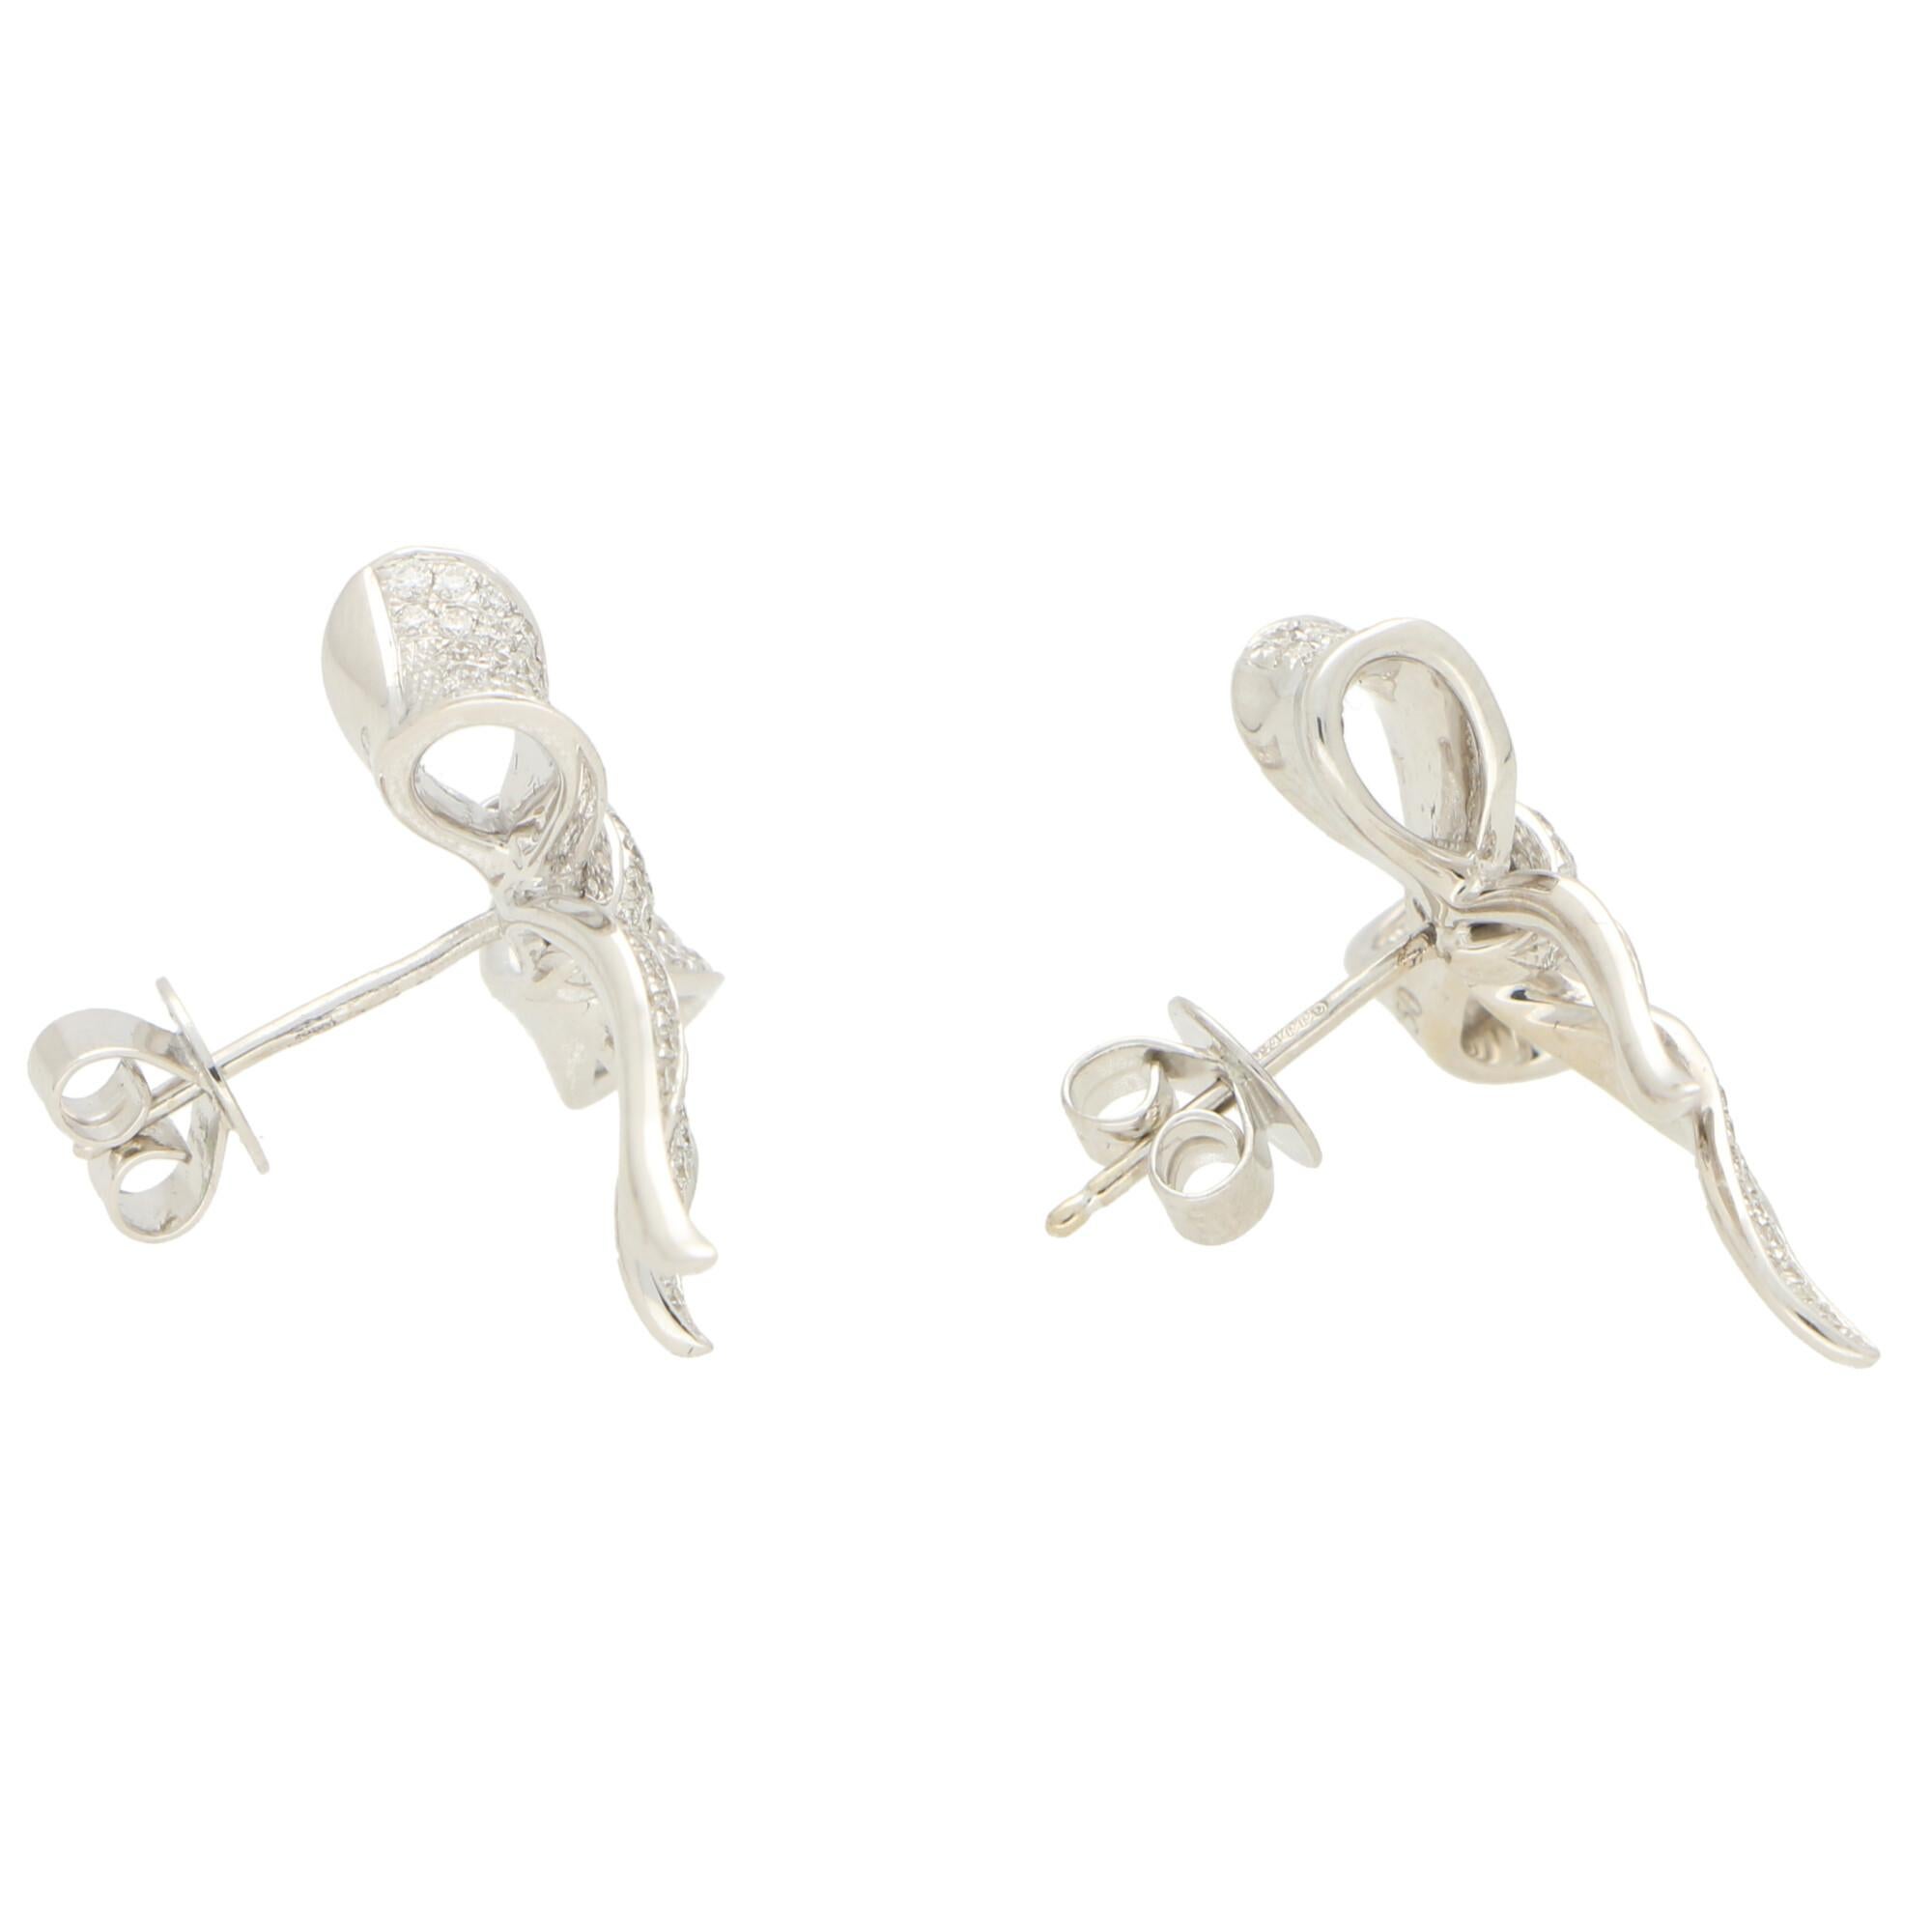 A beautiful pair of pave set diamond bow earrings set in 18k white gold.

Each earring depicts a beautiful bow which is pave set entirely with round brilliant cut diamonds. The earrings have been expertly crafted and the bows look incredibly